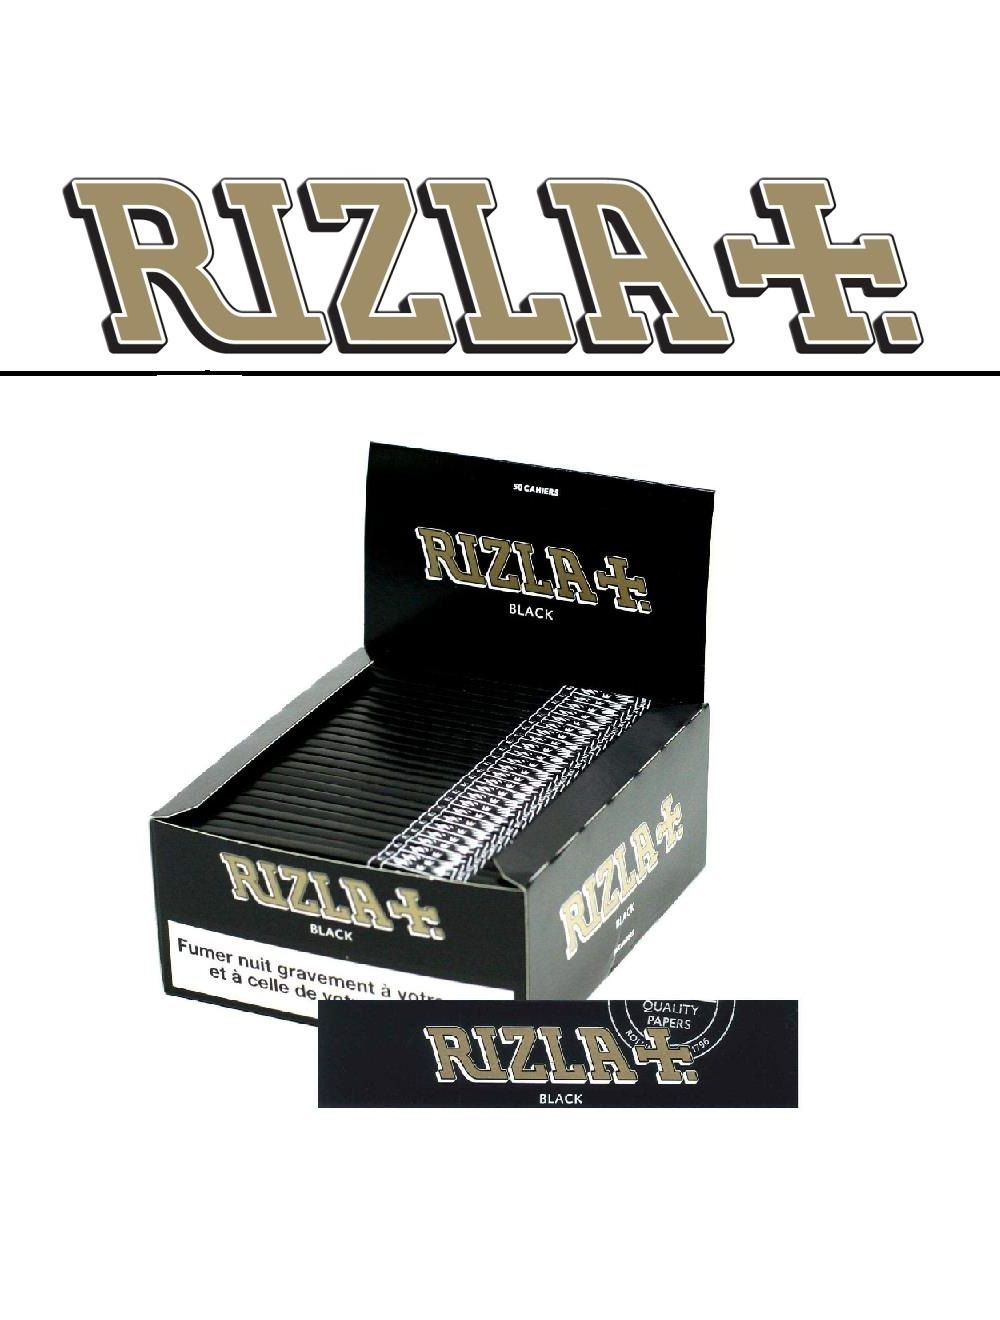 15 BOOKLETS RIZLA BLACK KING SIZE SLIM BEST PRICE!! LIMITED EDITION 